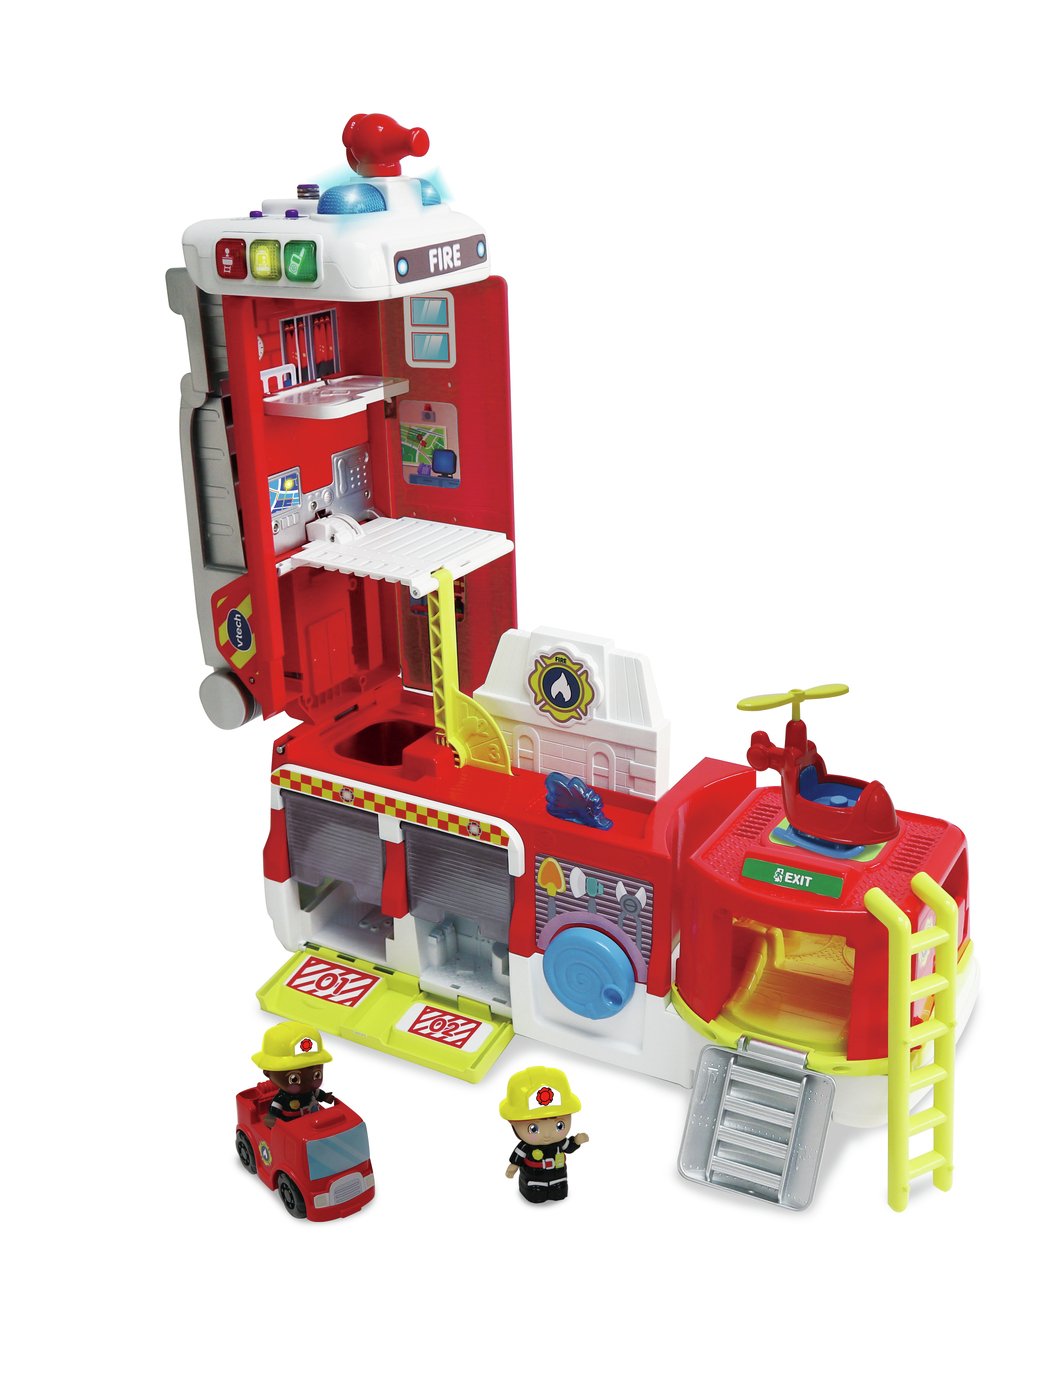 VTech Toot-Toot Friends 2-in-1 Fire Station Playset Review